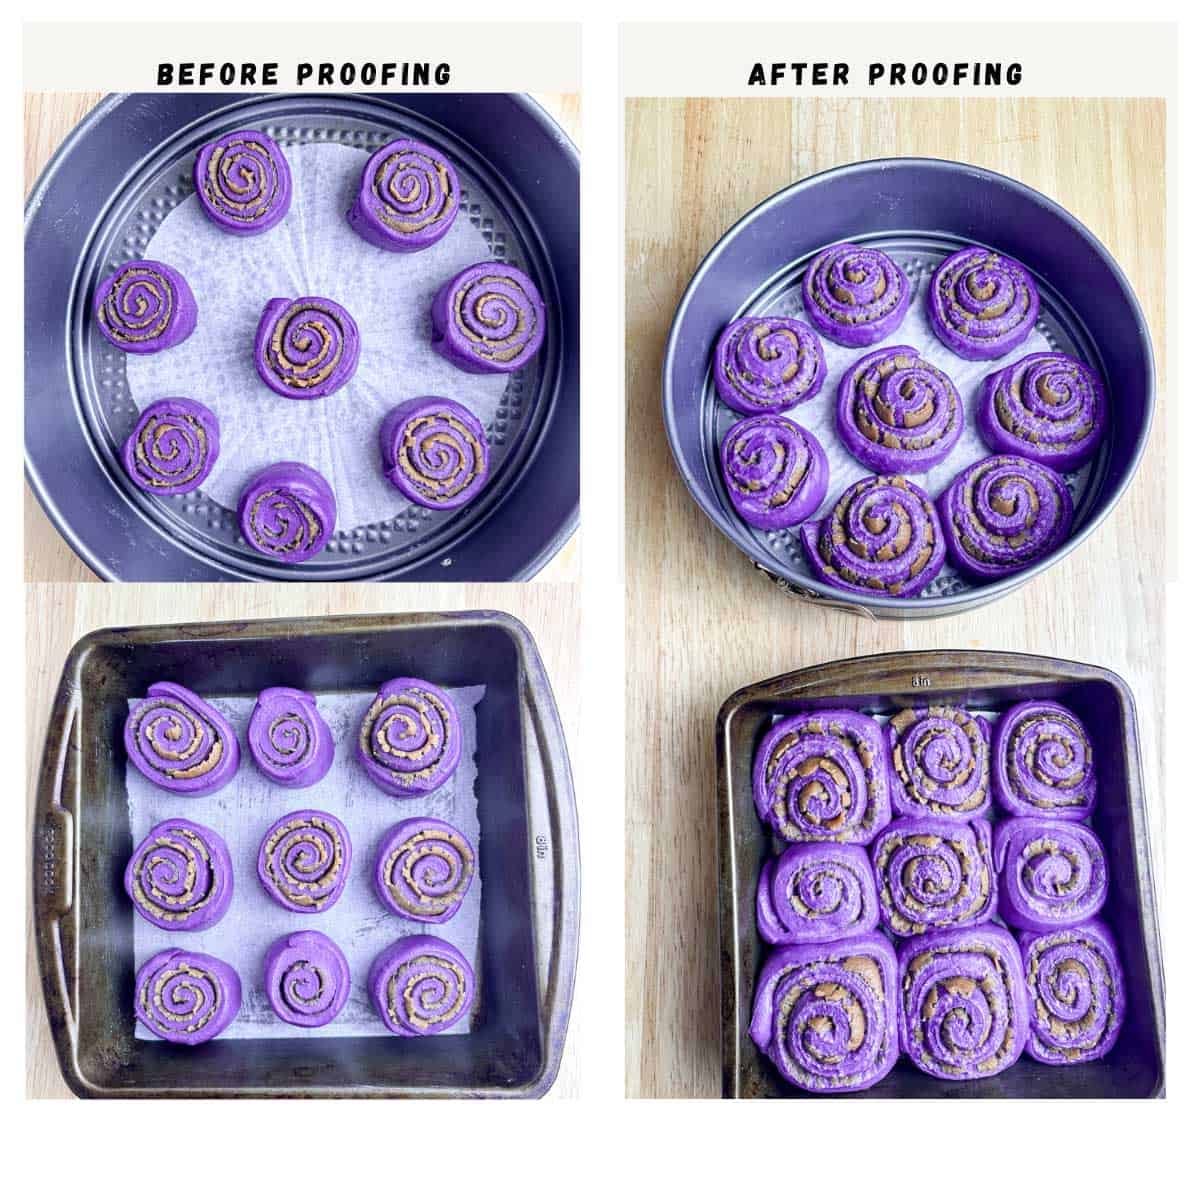 showing before and after images of proofing the cinnamon rolls